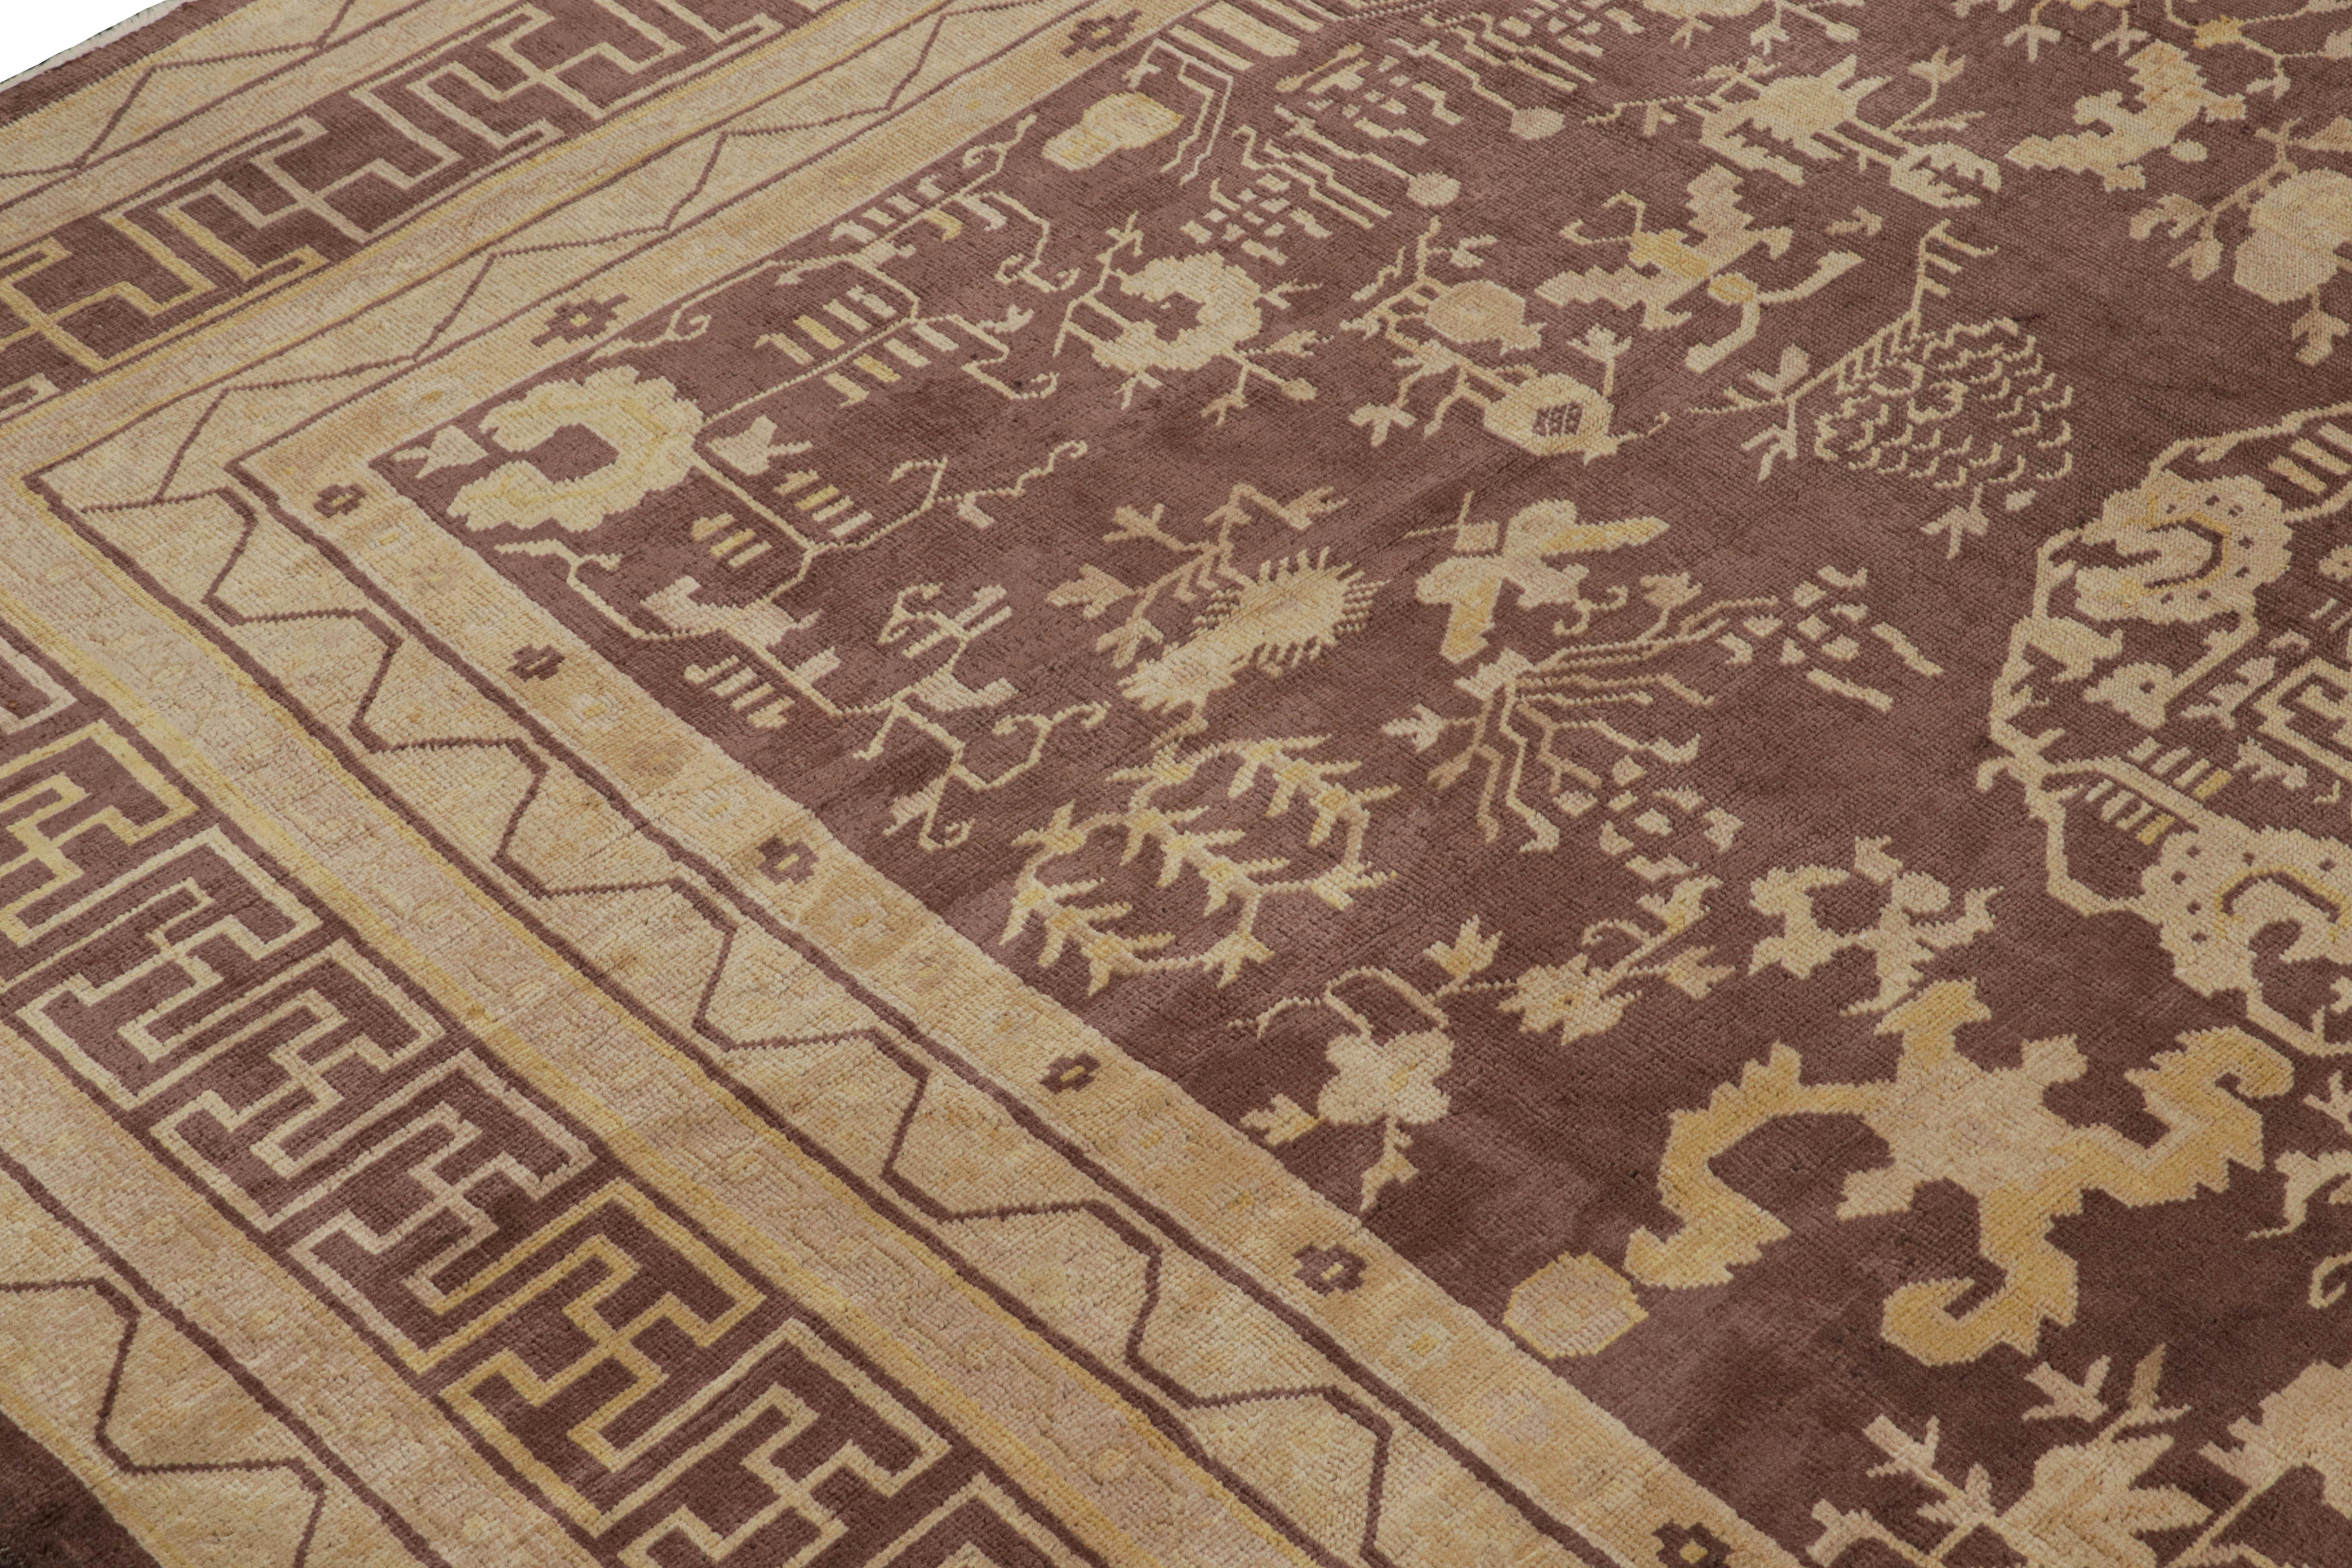 Early 20th Century Antique Samarkand Rug in Brown with Gold Patterns, from Rug & Kilim For Sale